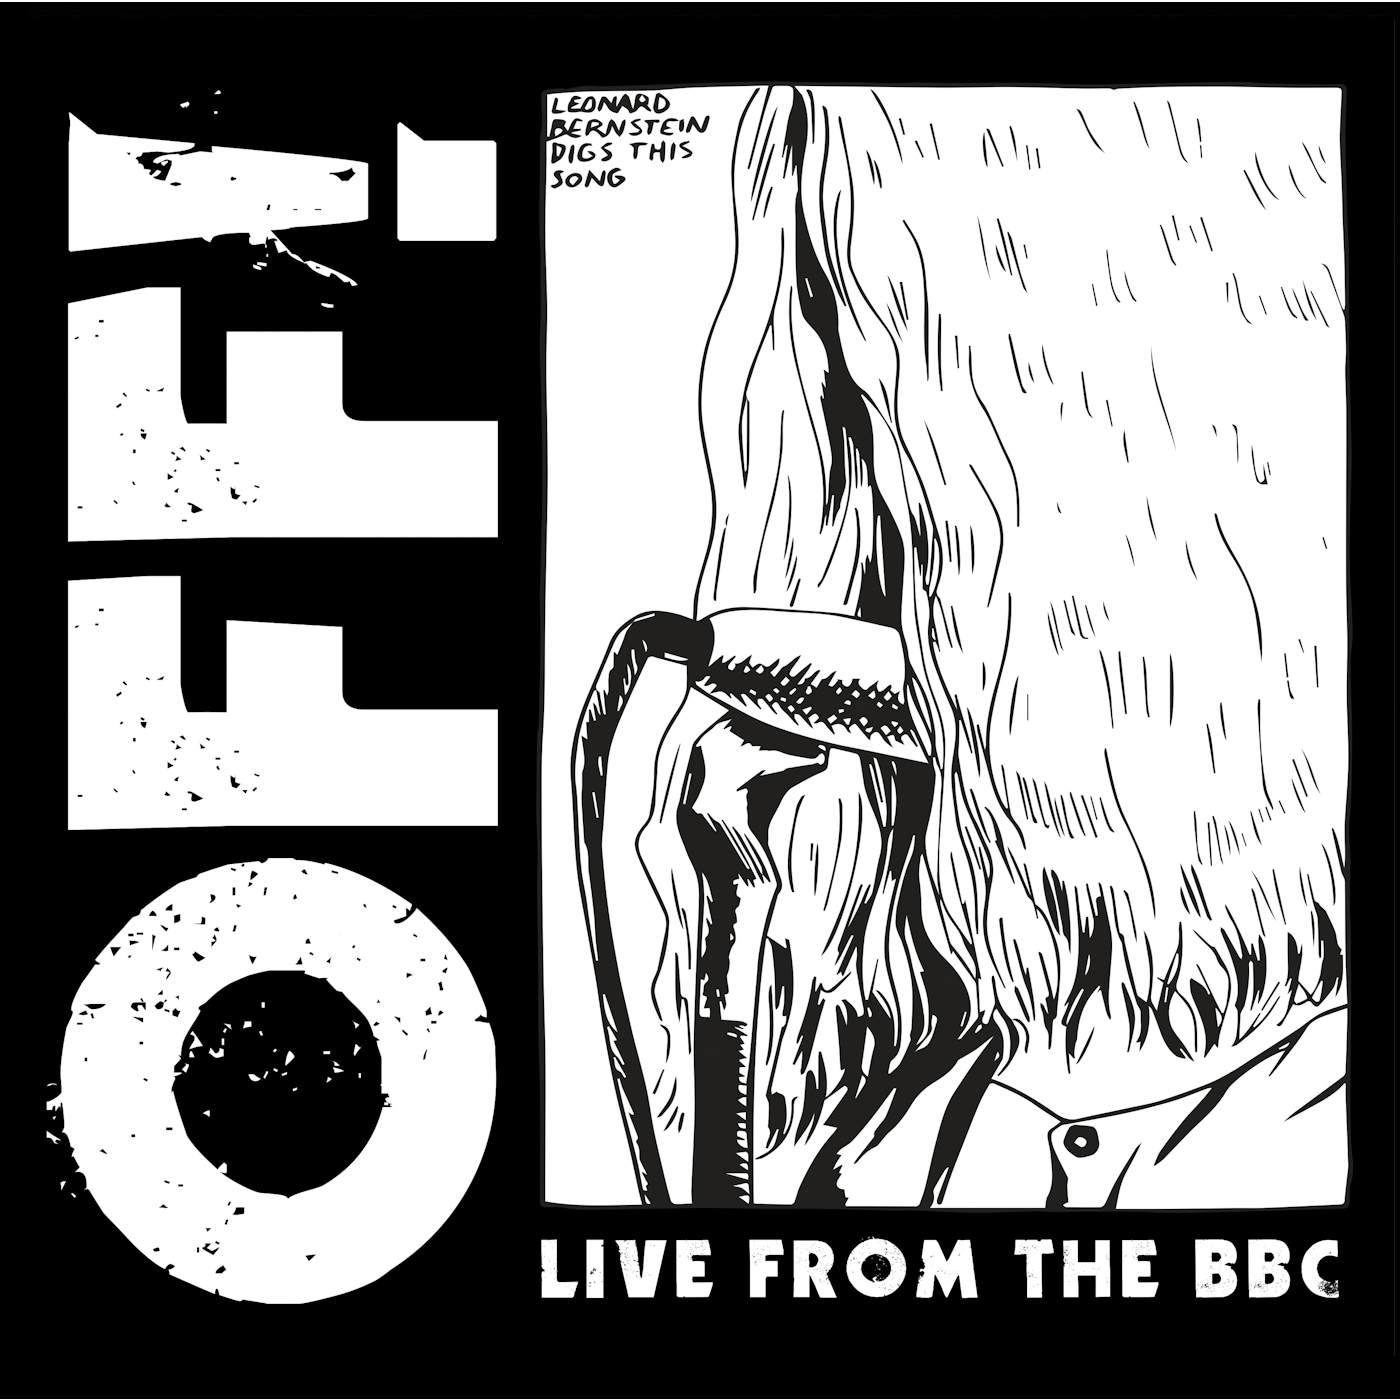 OFF LIVE FROM THE BBC Vinyl Record